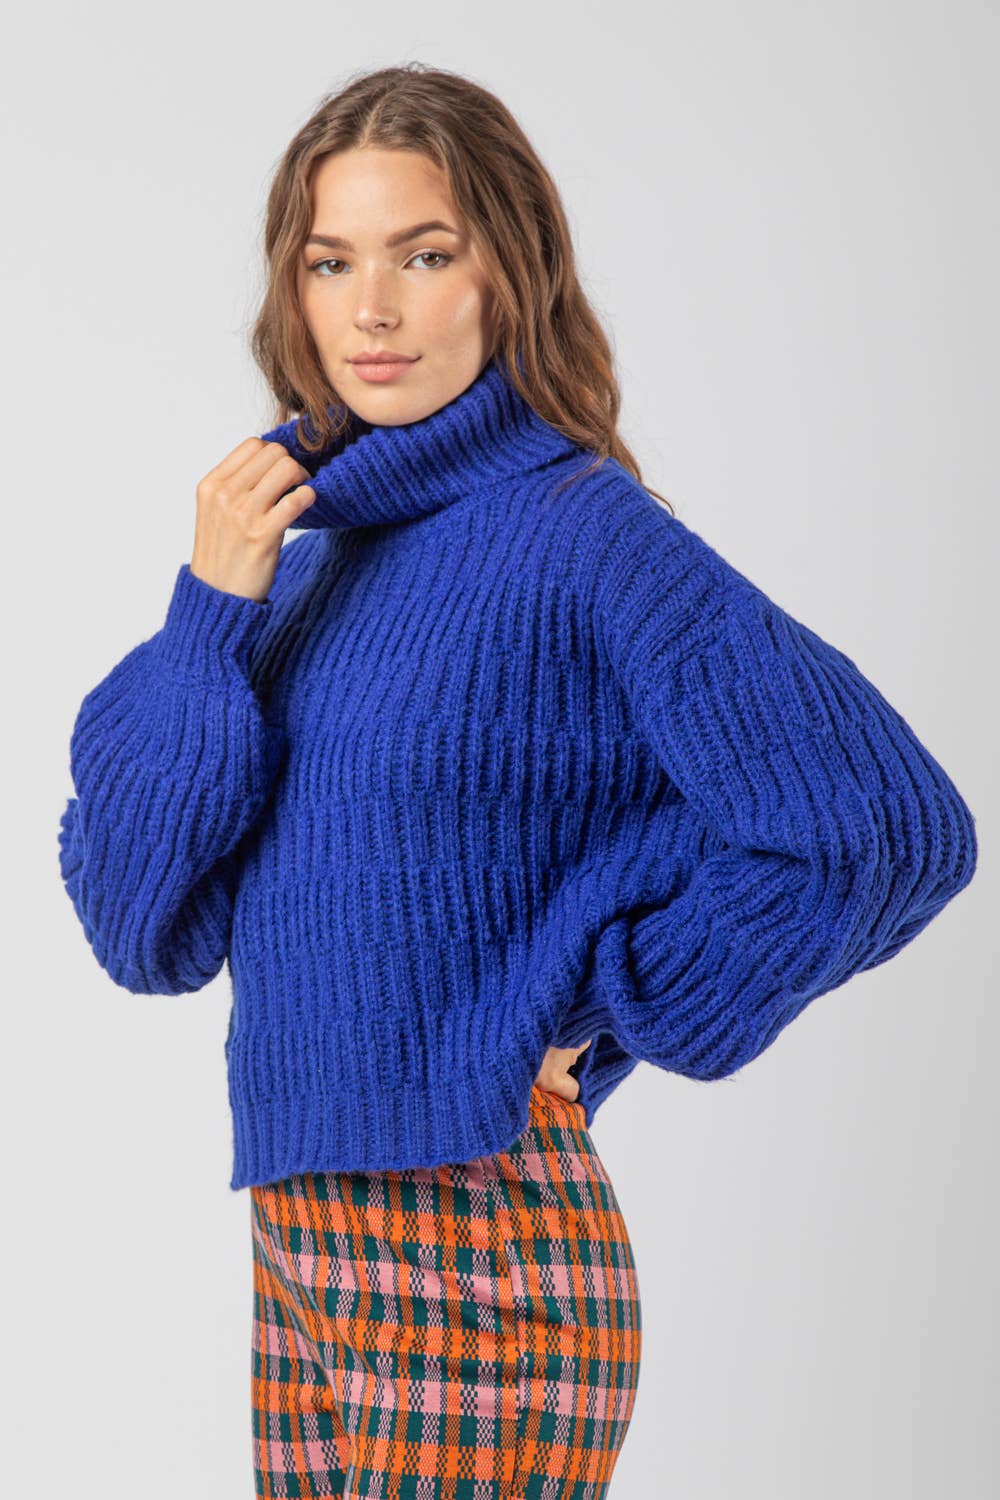 Royal Blue Turtle Neck Textured Knit Sweater Top